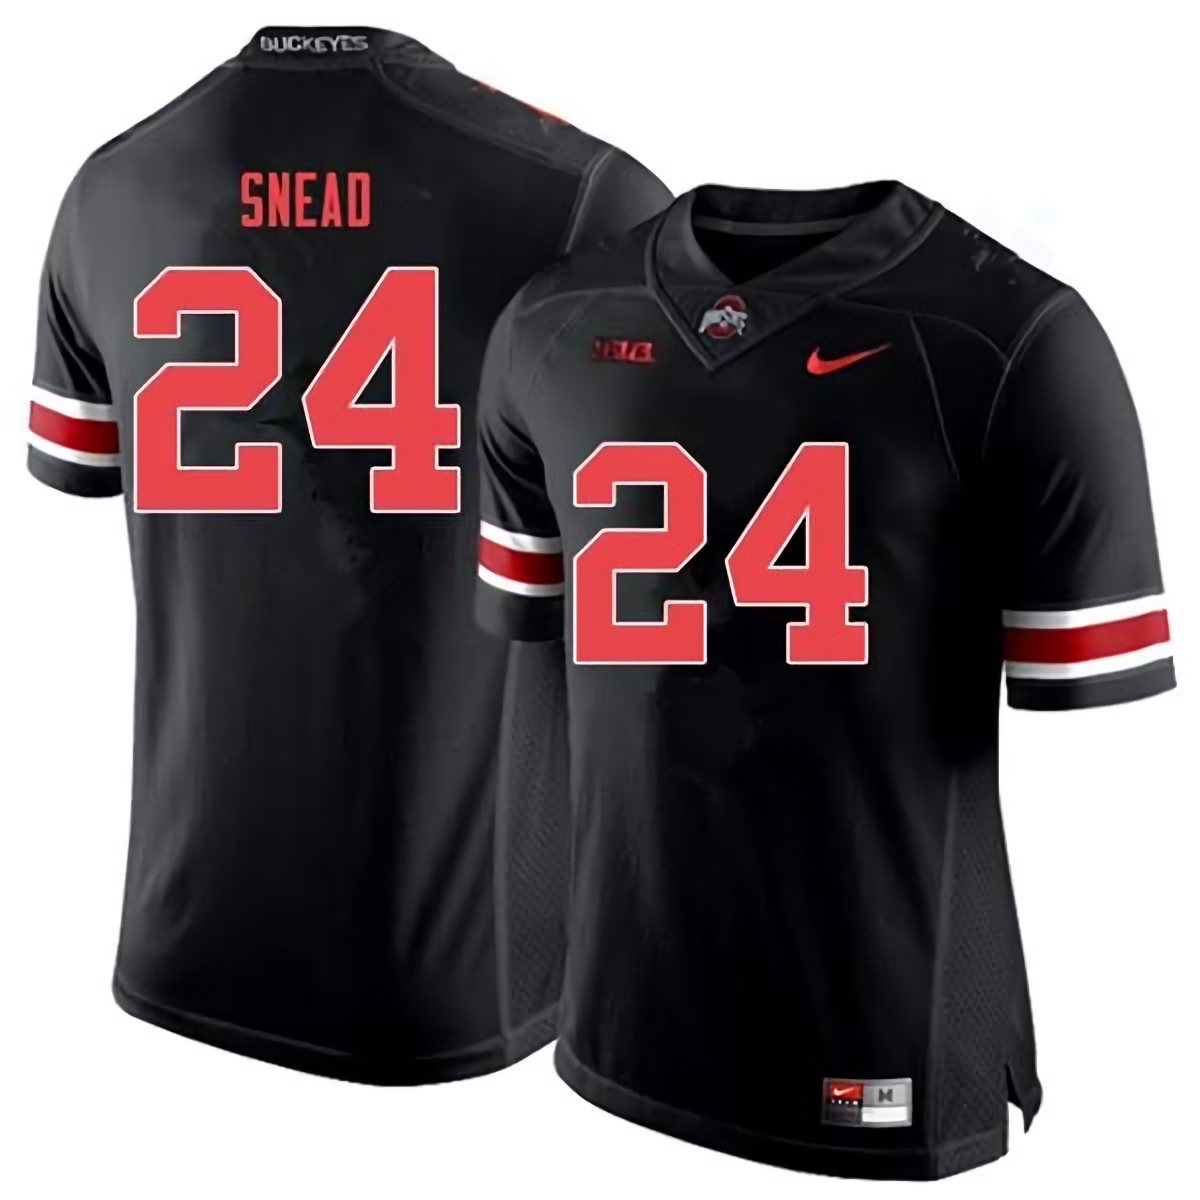 Brian Snead Ohio State Buckeyes Men's NCAA #24 Nike Black Out College Stitched Football Jersey VJW0556BS